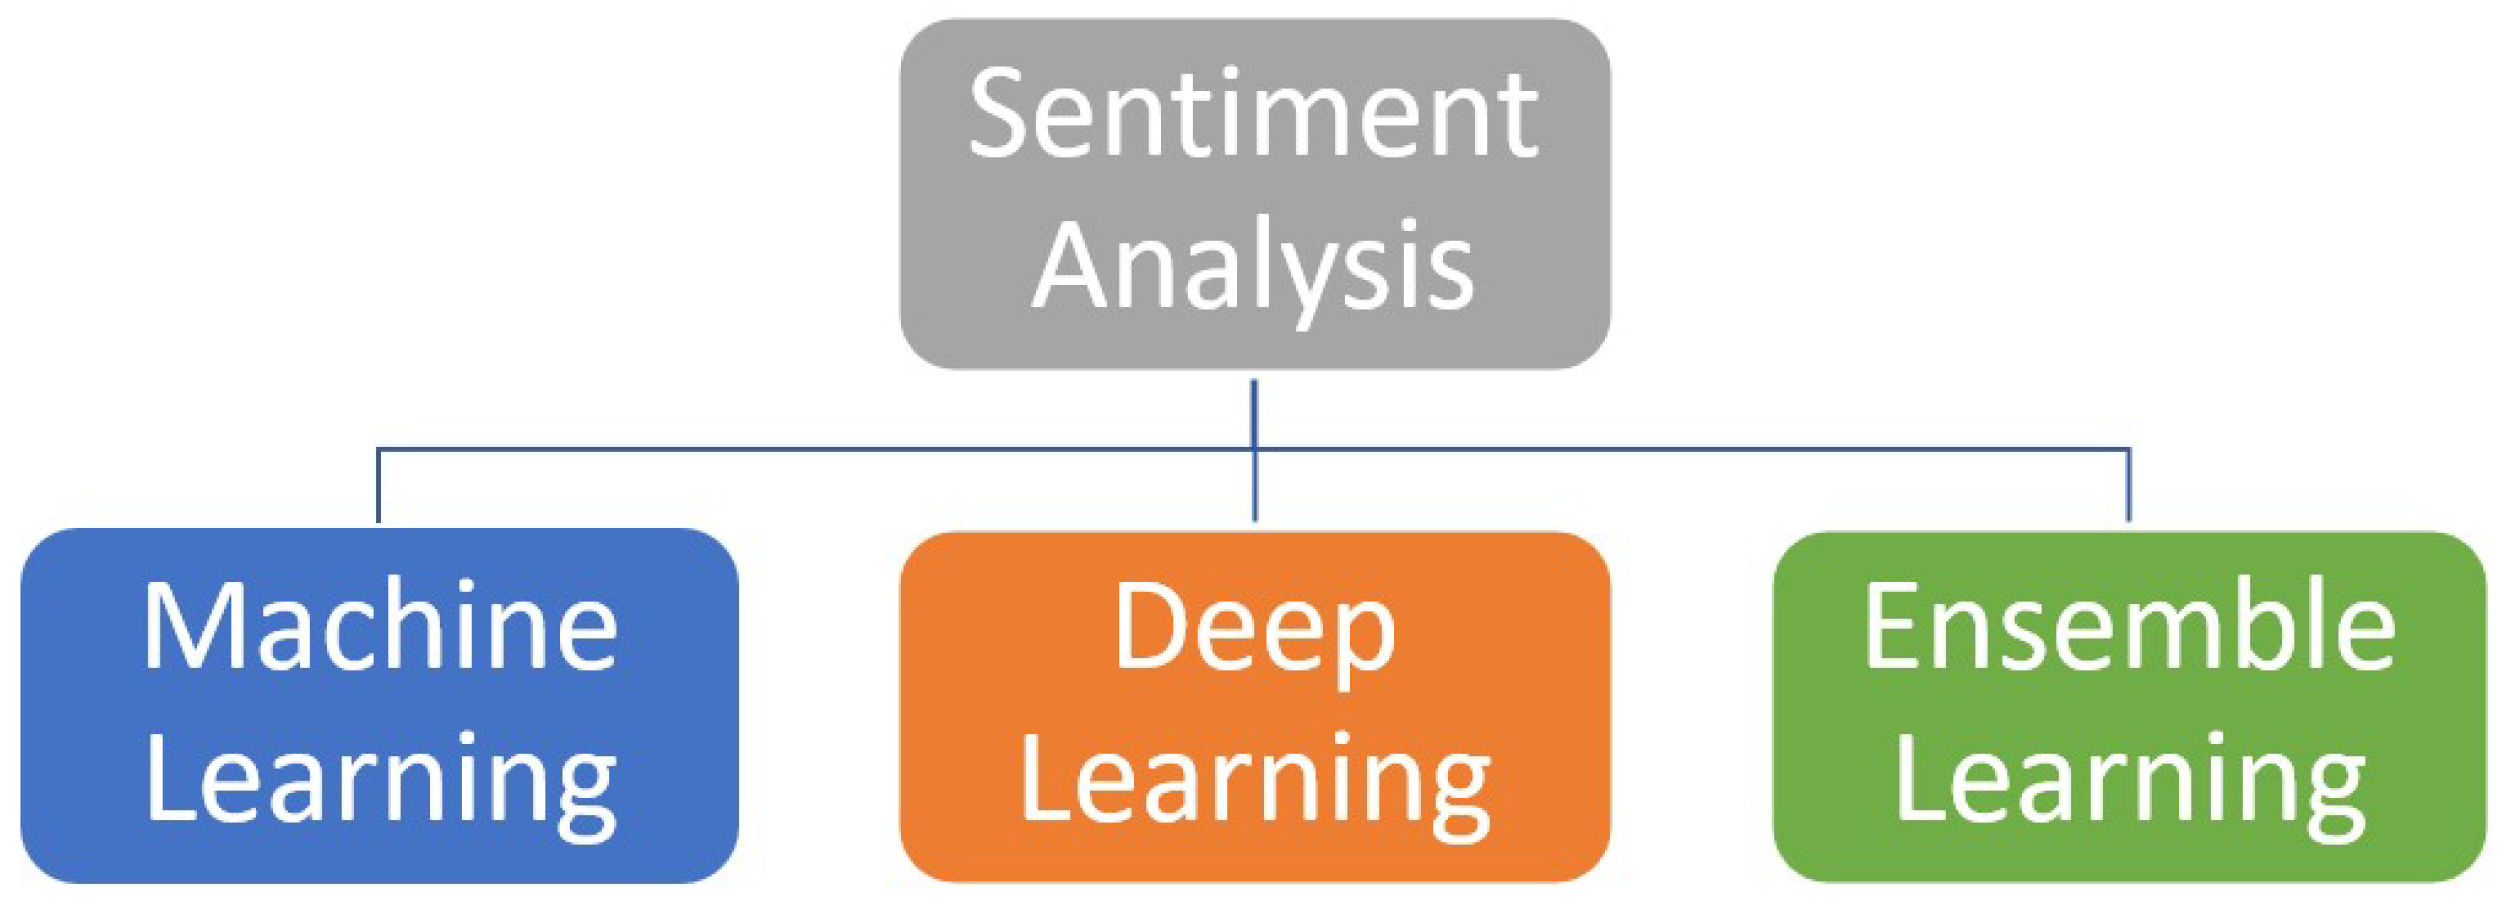 sentiment analysis research papers ieee 2021